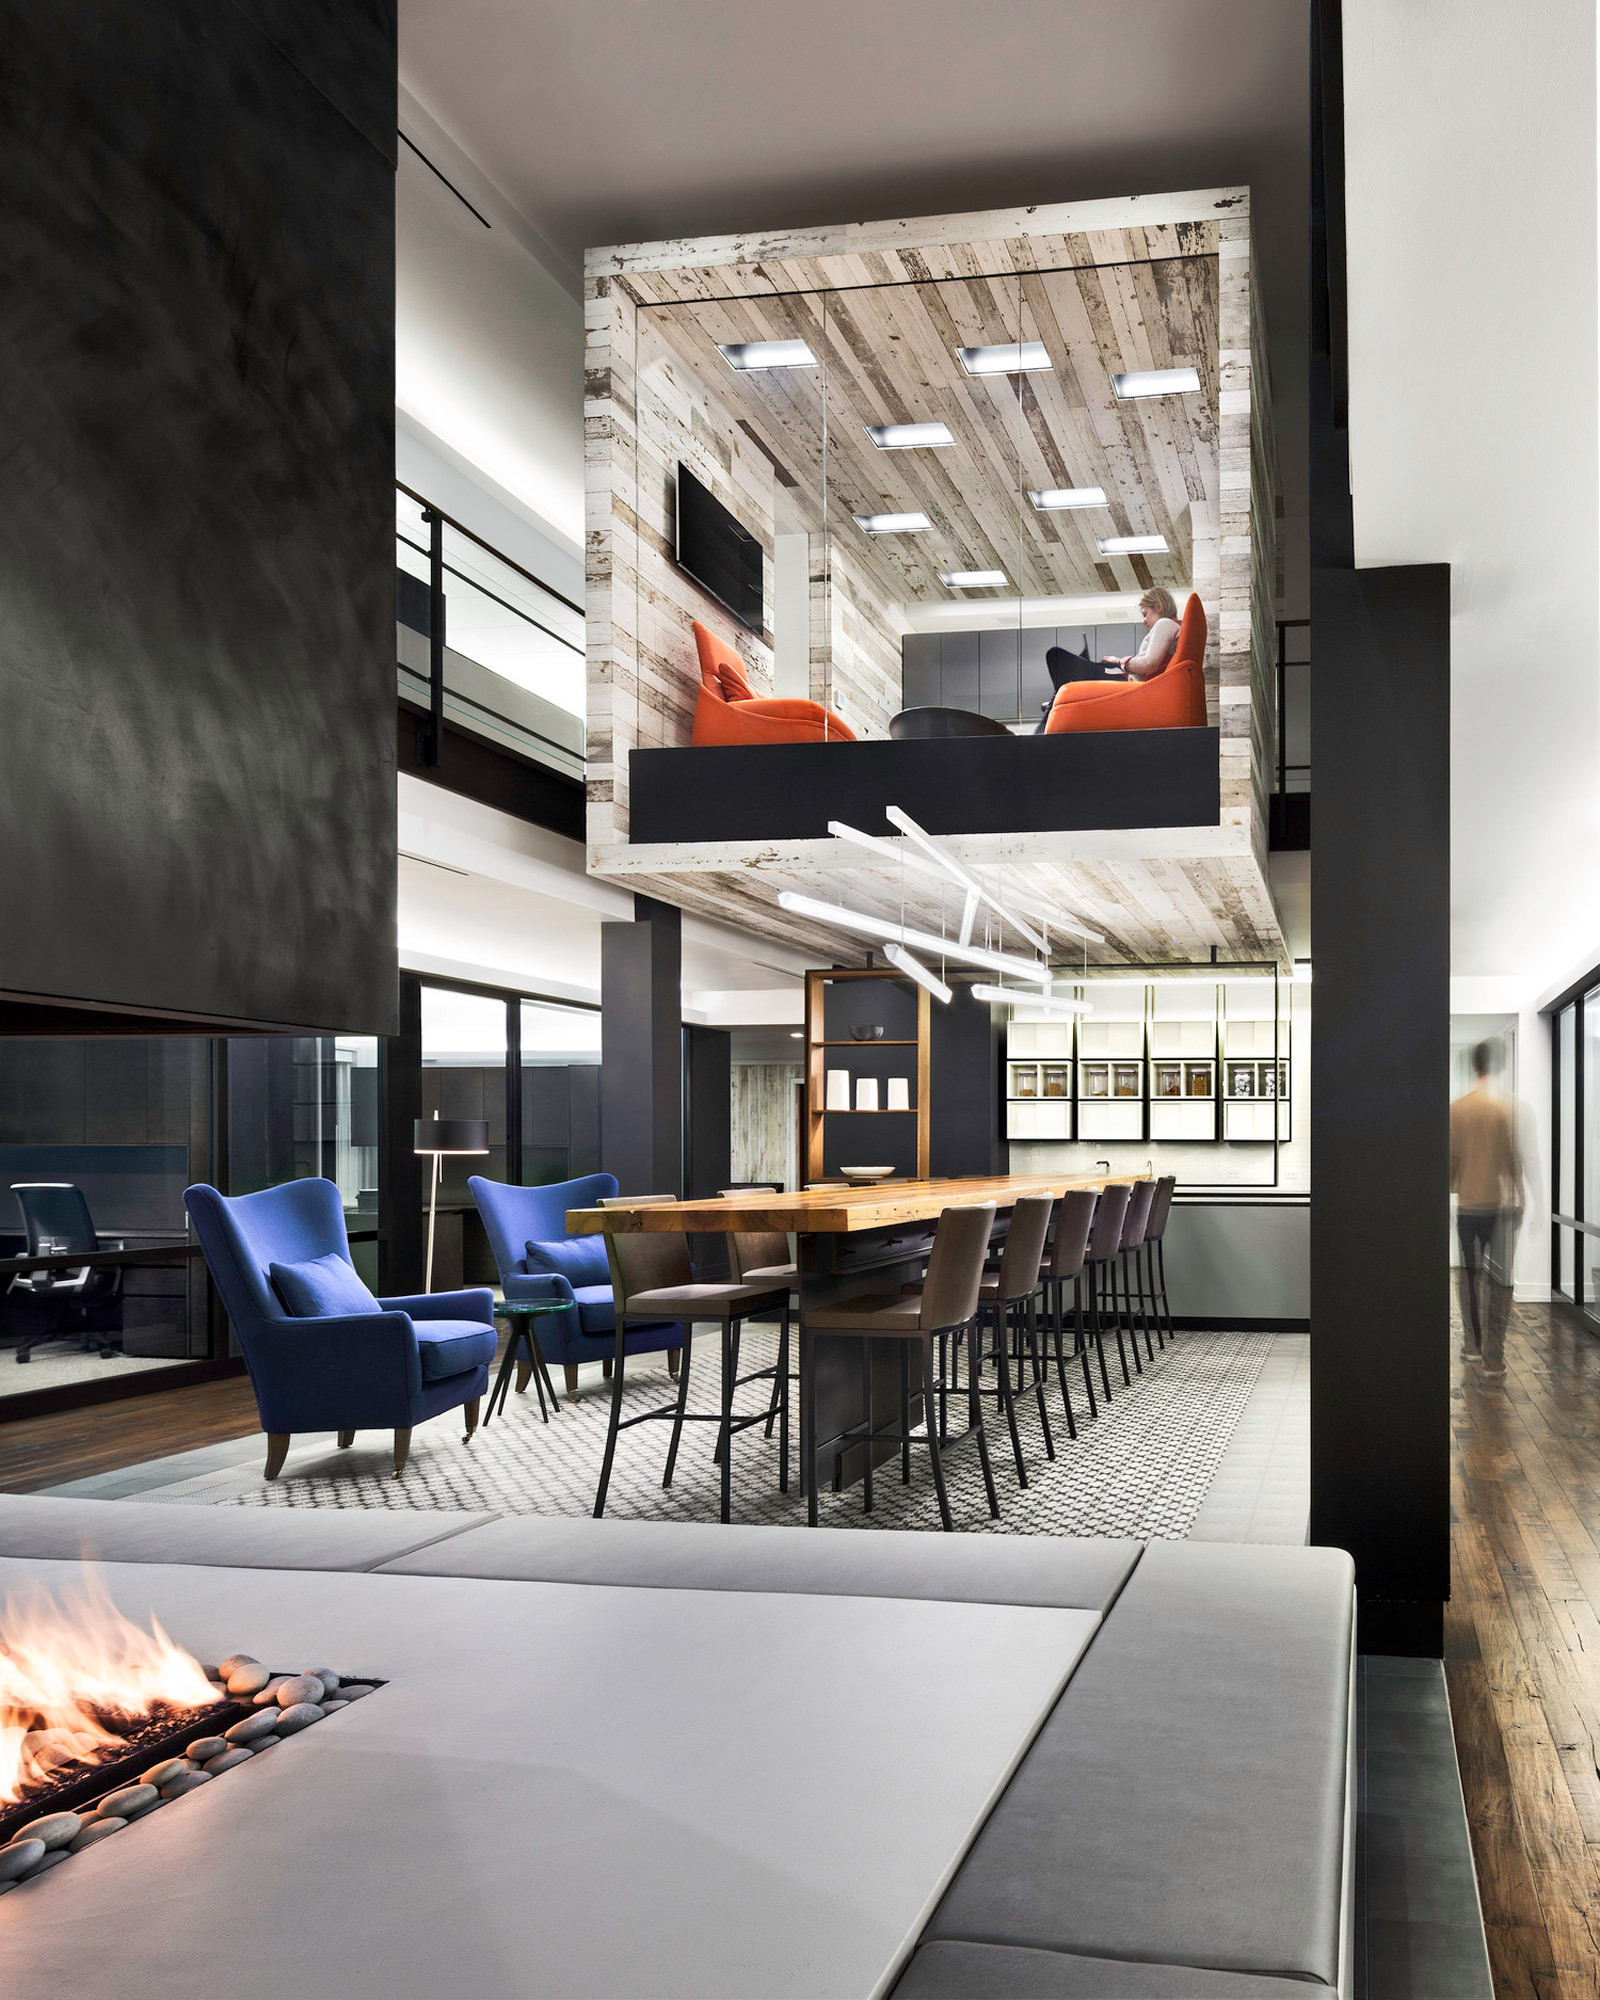 Modern open-plan office space utilizing a monochromatic palette with black accents. Central to the design is a suspended wooden box meeting area with glass sides, furnished with burnt orange armchairs. Below, a seamless transition connects a cozy fireside lounge to a communal workspace with deep blue chairs.